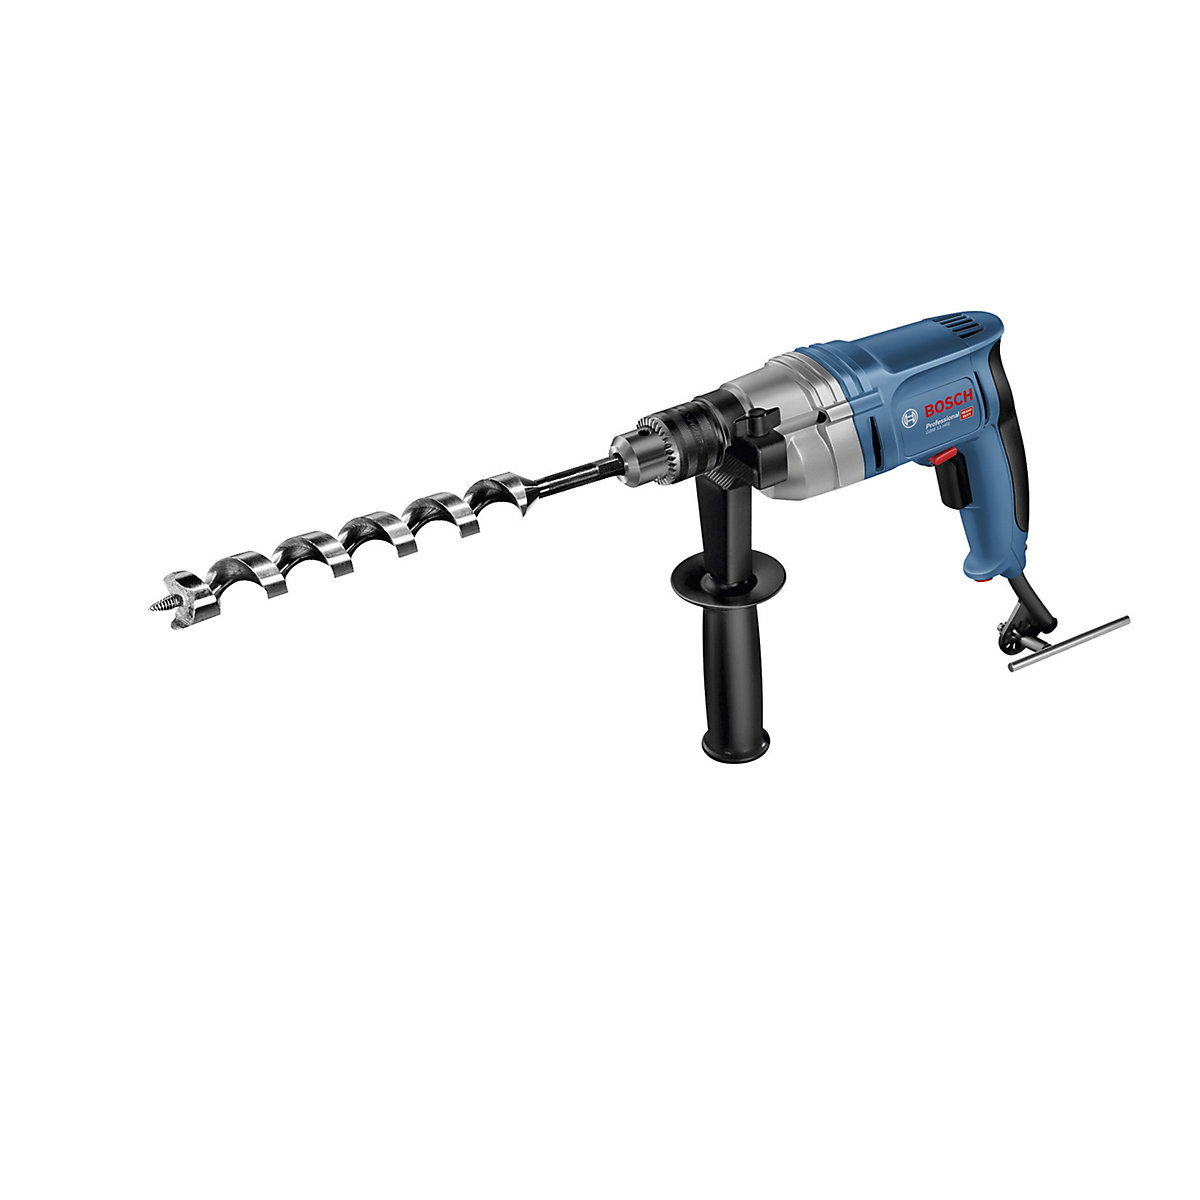 Perceuse GBM 13 HRE Professional - Bosch